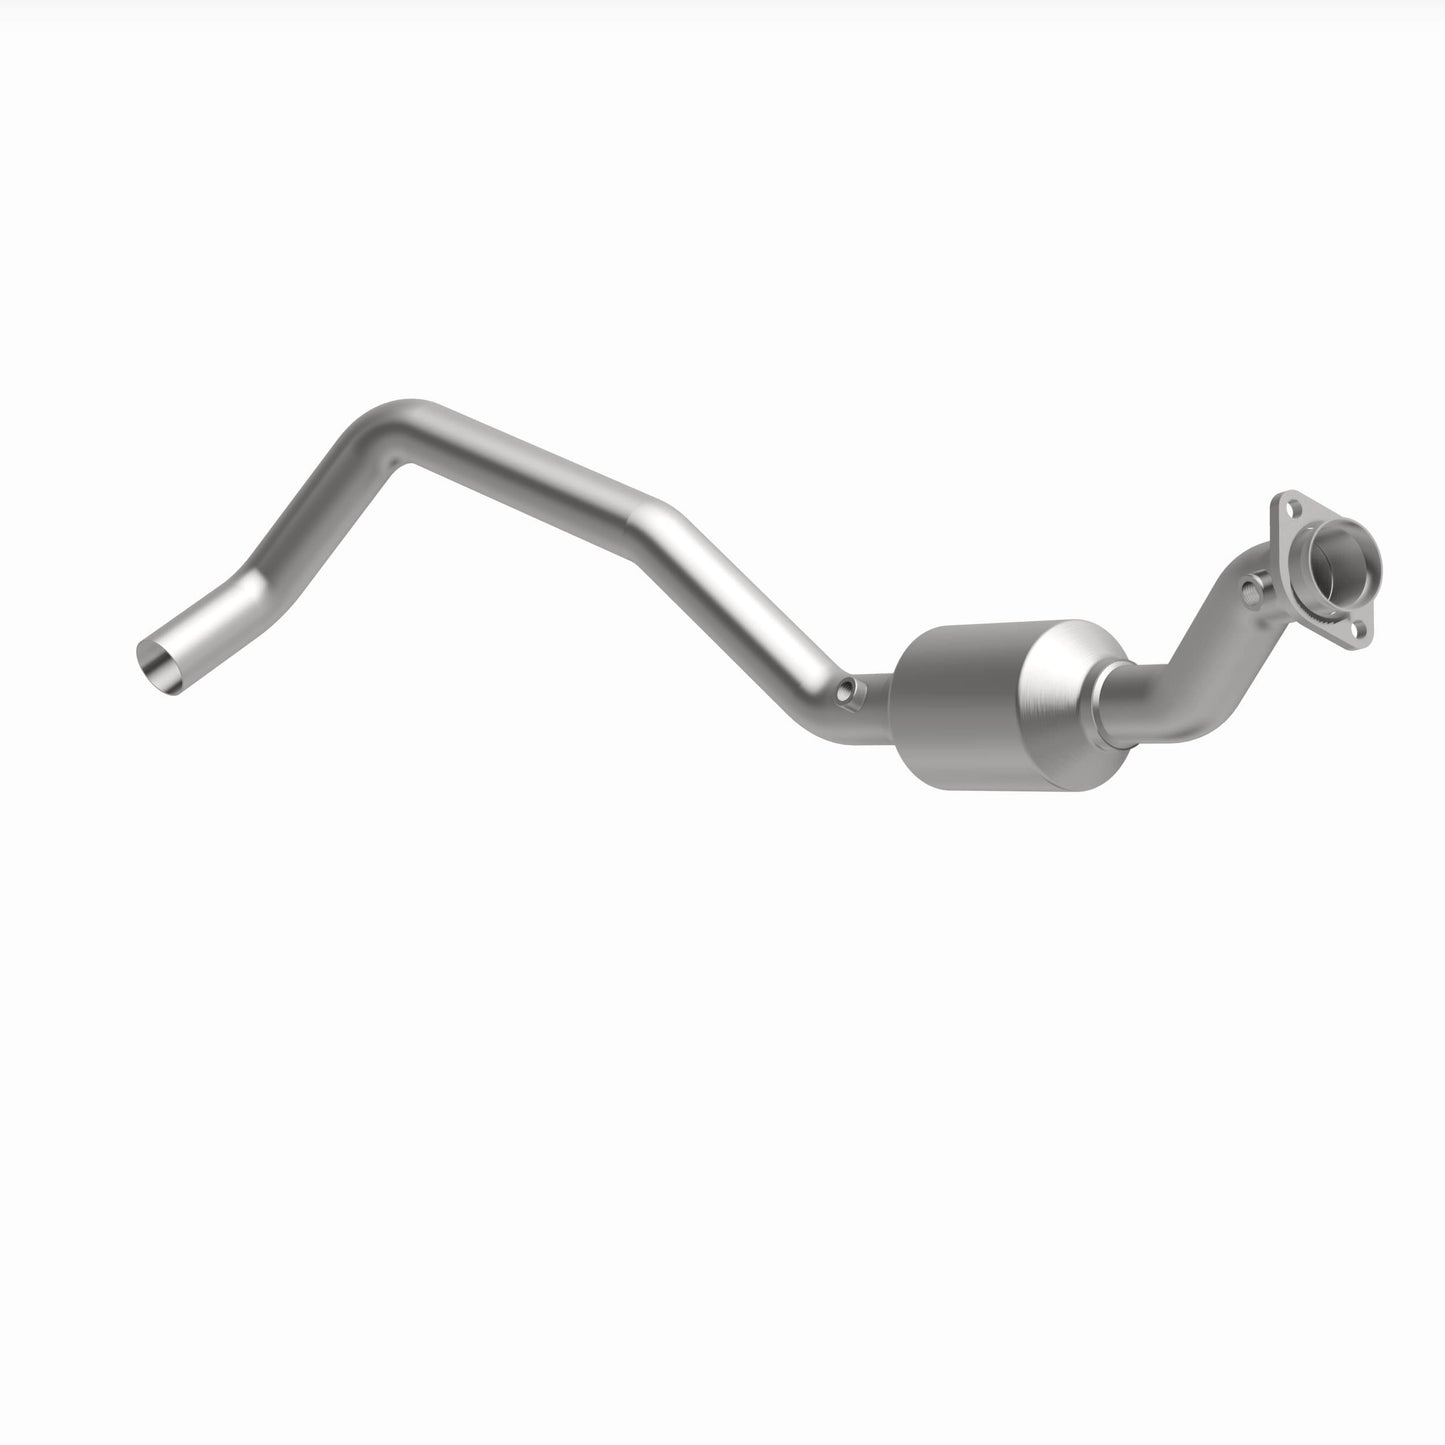 Fits 2004 Dodge Ram 1500 CARB Compliant Direct-Fit Catalytic Converter 4651609